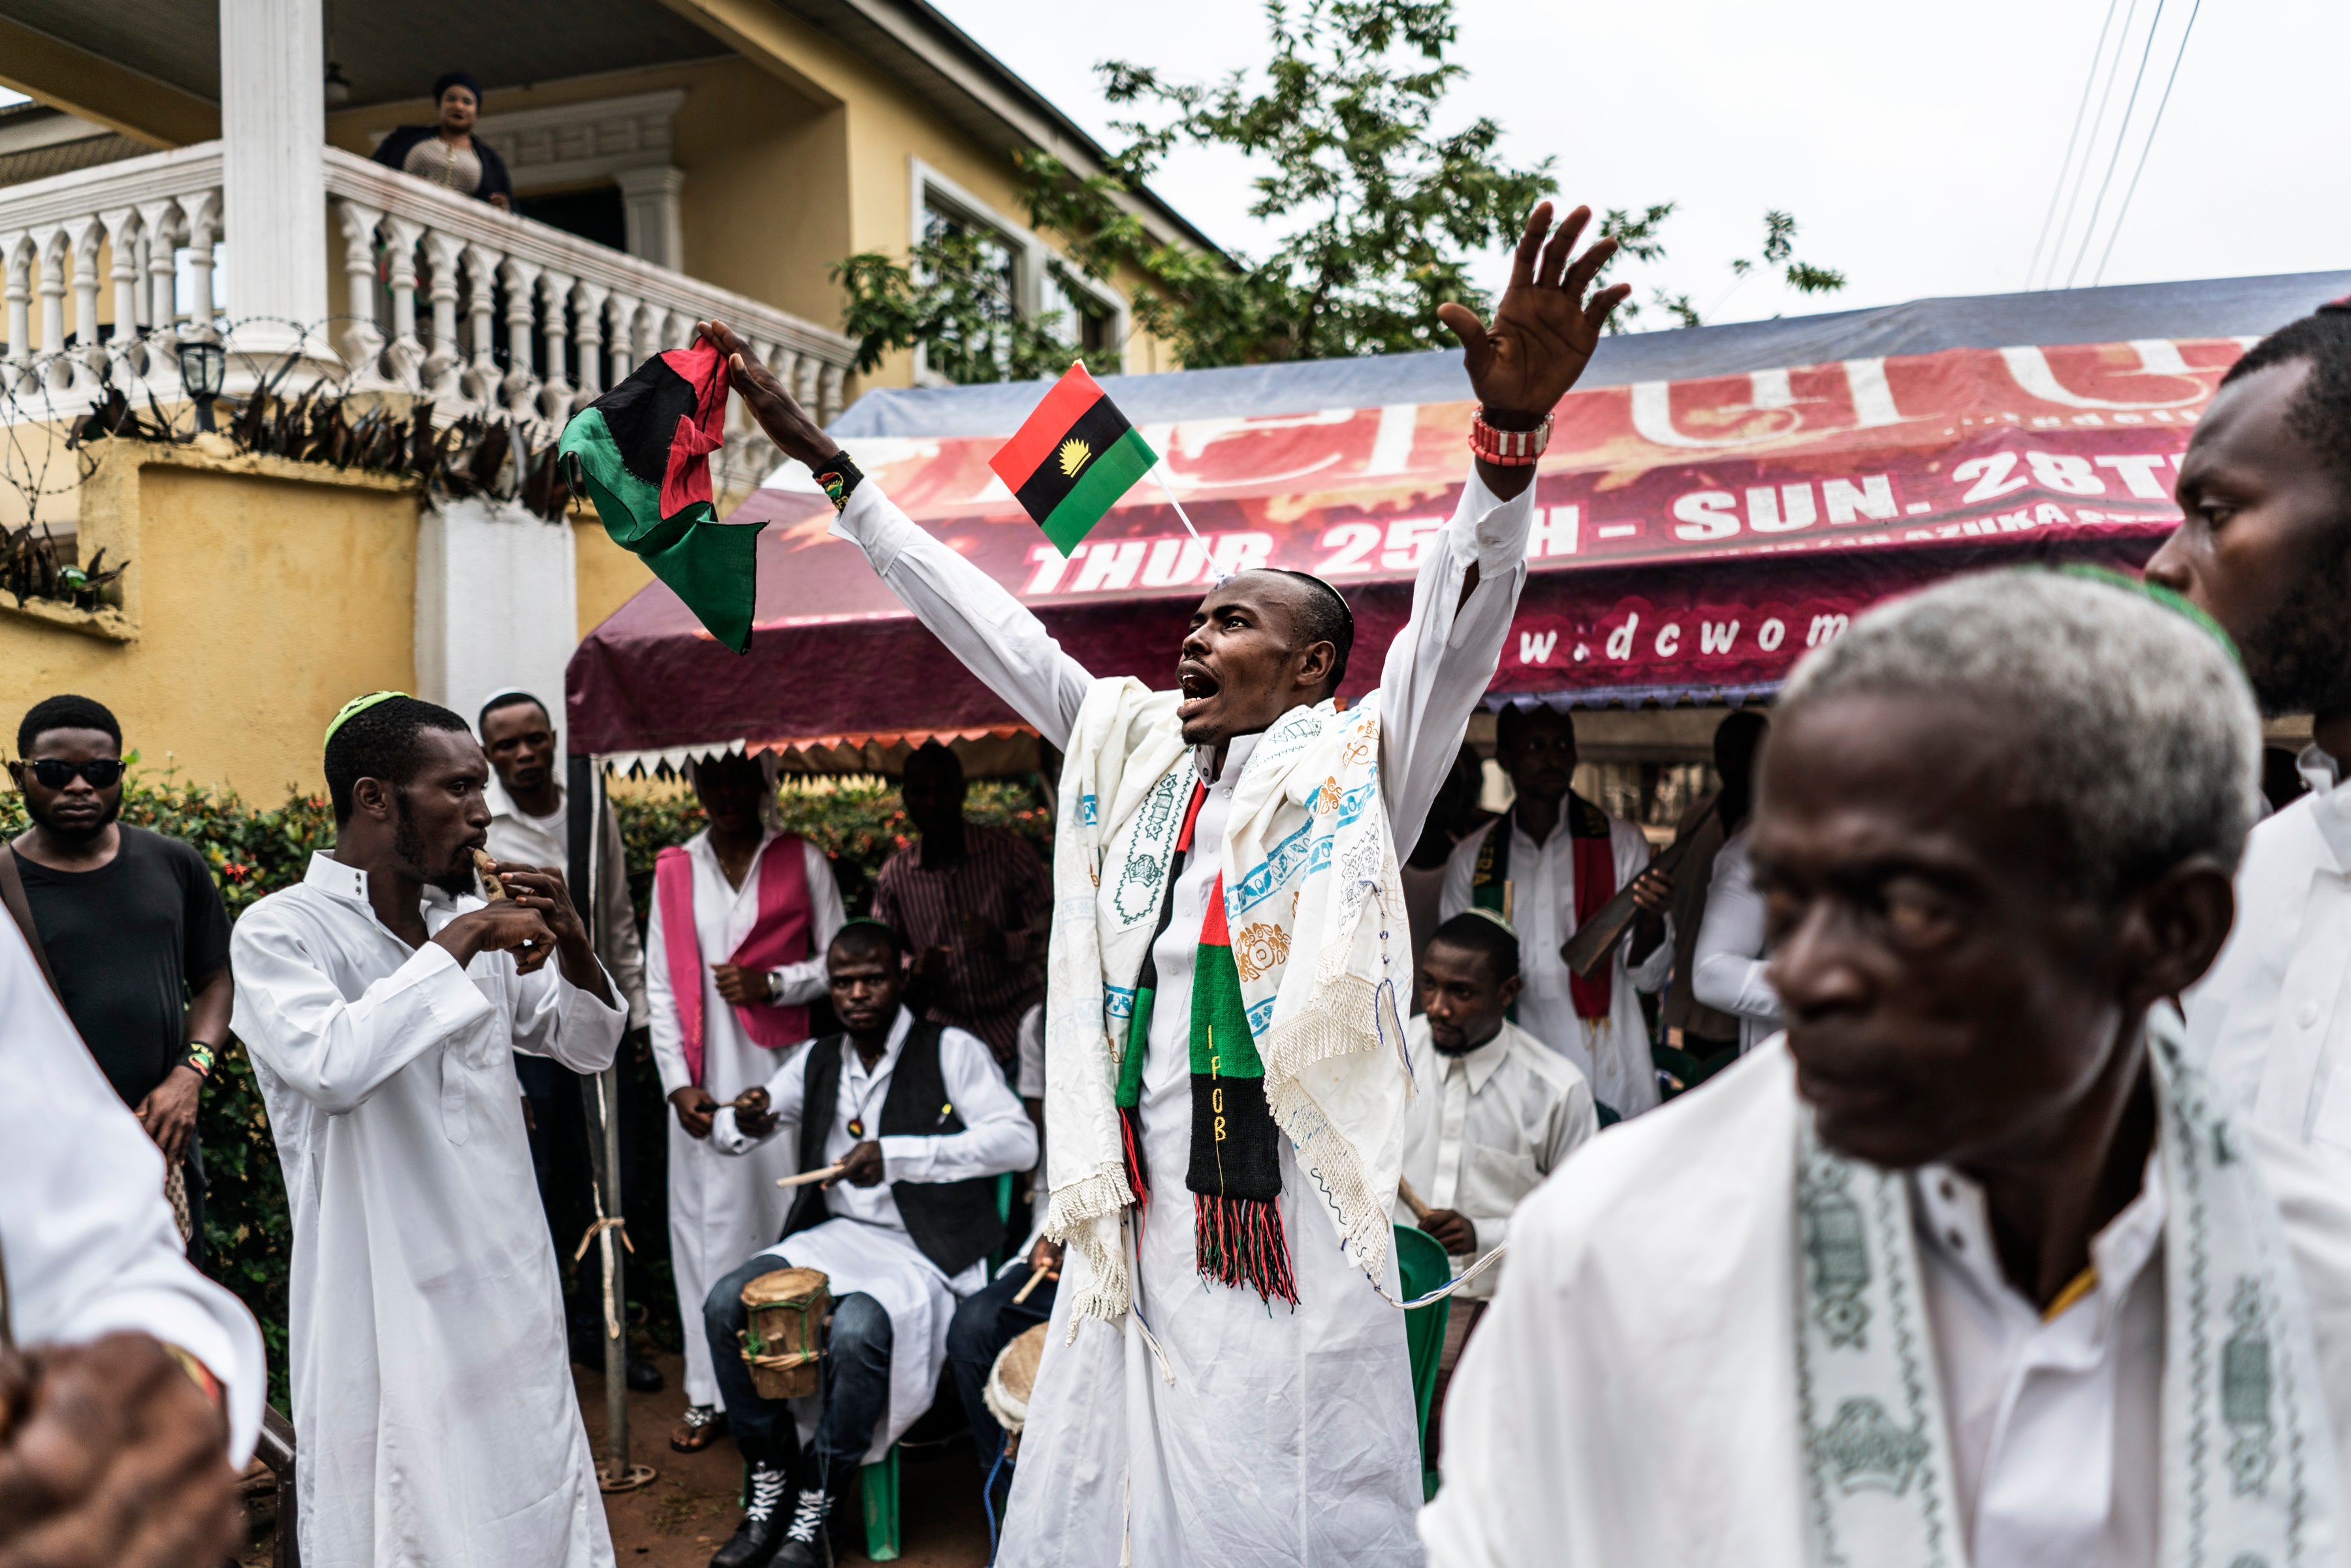 An Ipob supporter joins members of the Yahveh Yashua synagogue celebrating Shabbat outside the residence of the movement's leader Kanu in Umuahia